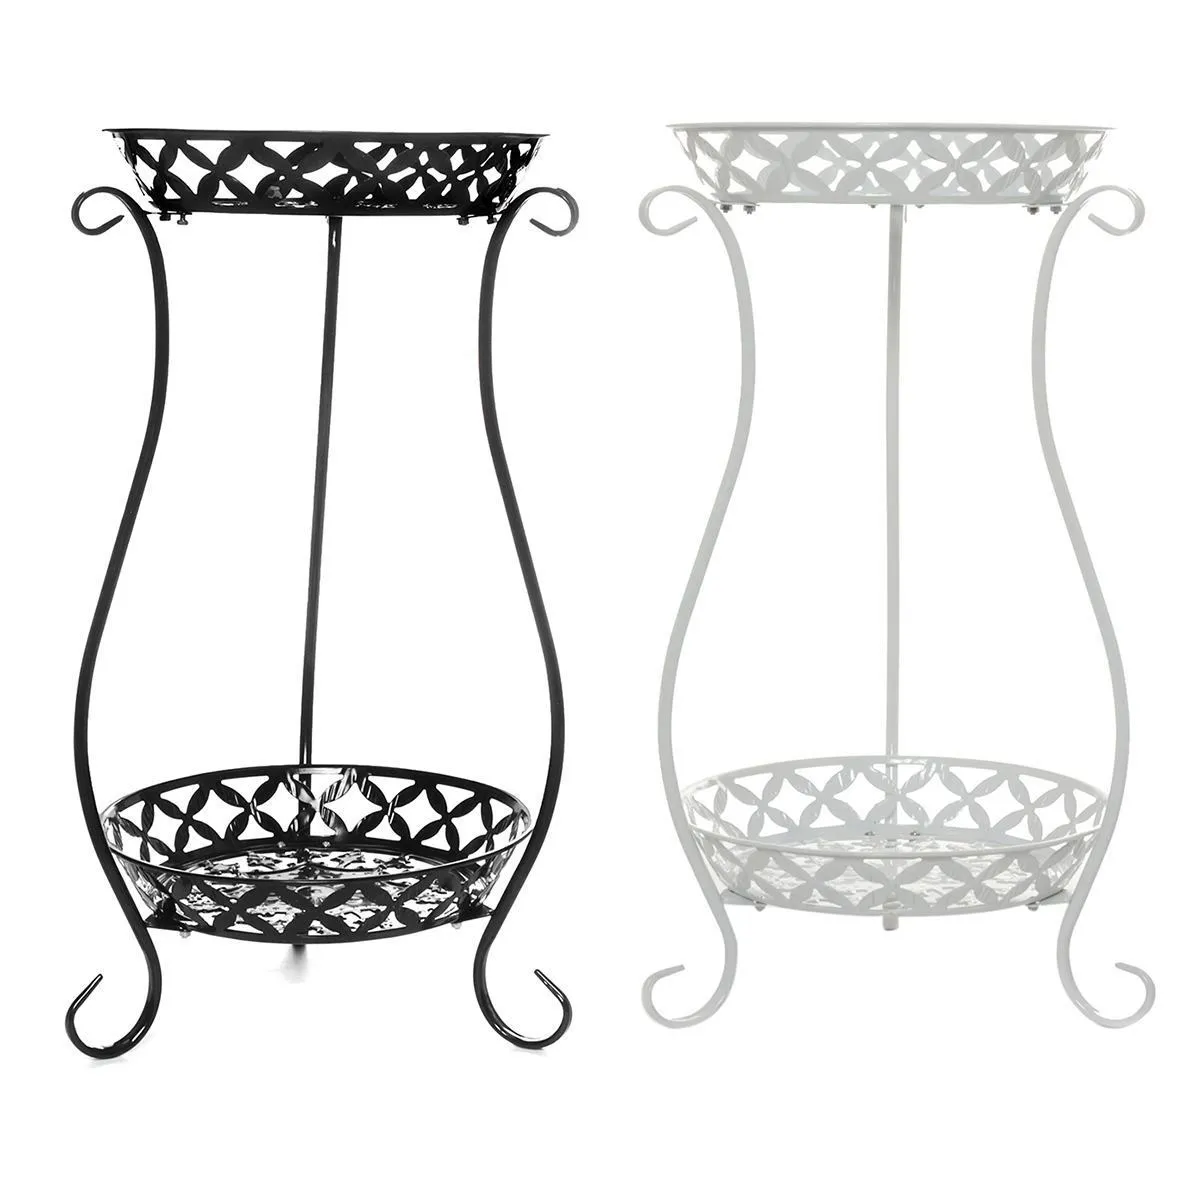 Wrought Iron Double-layer Plant Stand Flower Shelf for Rack Balcony Simple Indoor Living Room Coffee Bar Garden Flower Pot Shelf L253M